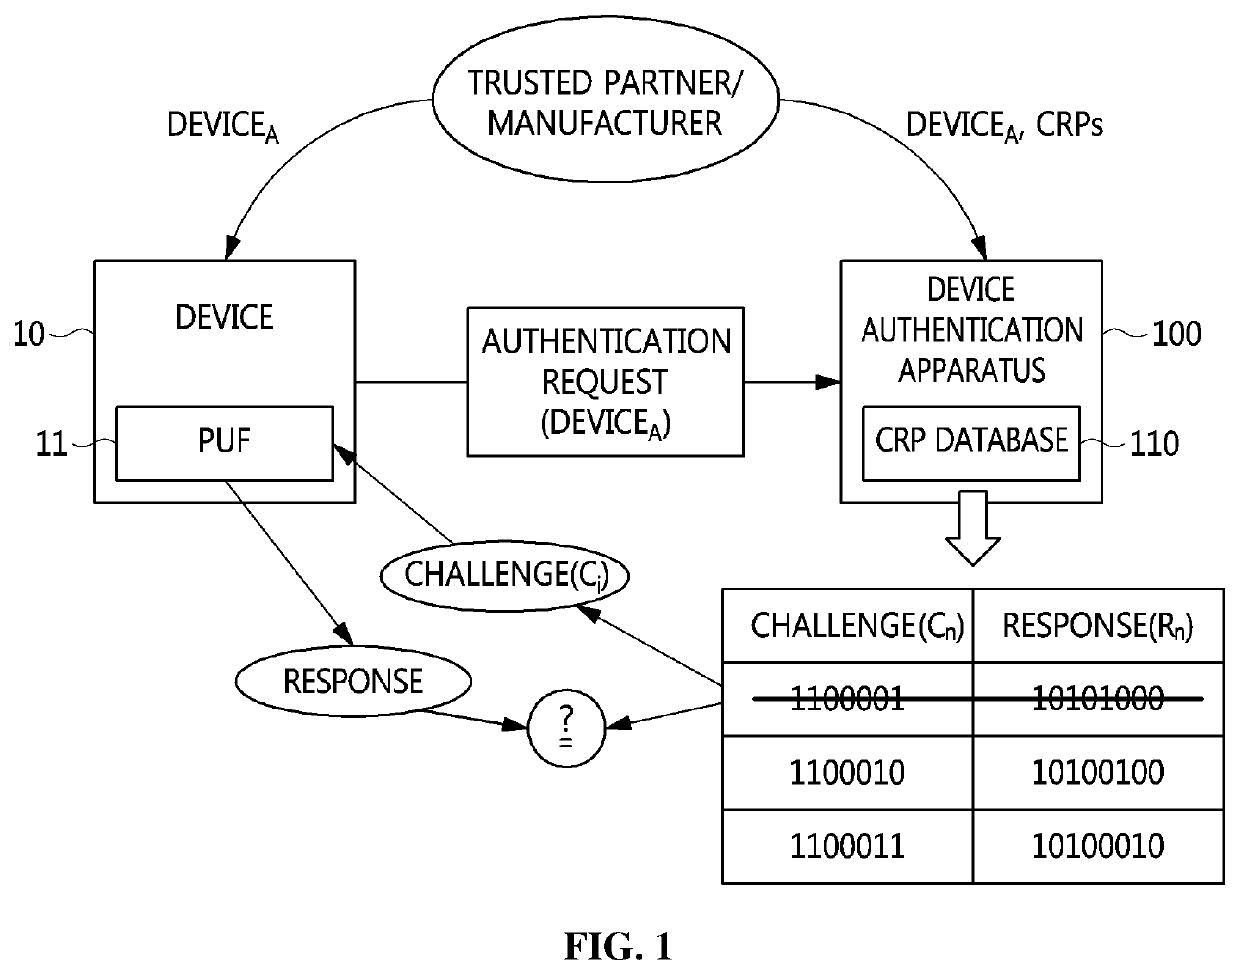 APPARATUS AND METHOD FOR AUTHENTICATING IoT DEVICE BASED ON PUF USING WHITE-BOX CRYPTOGRAPHY